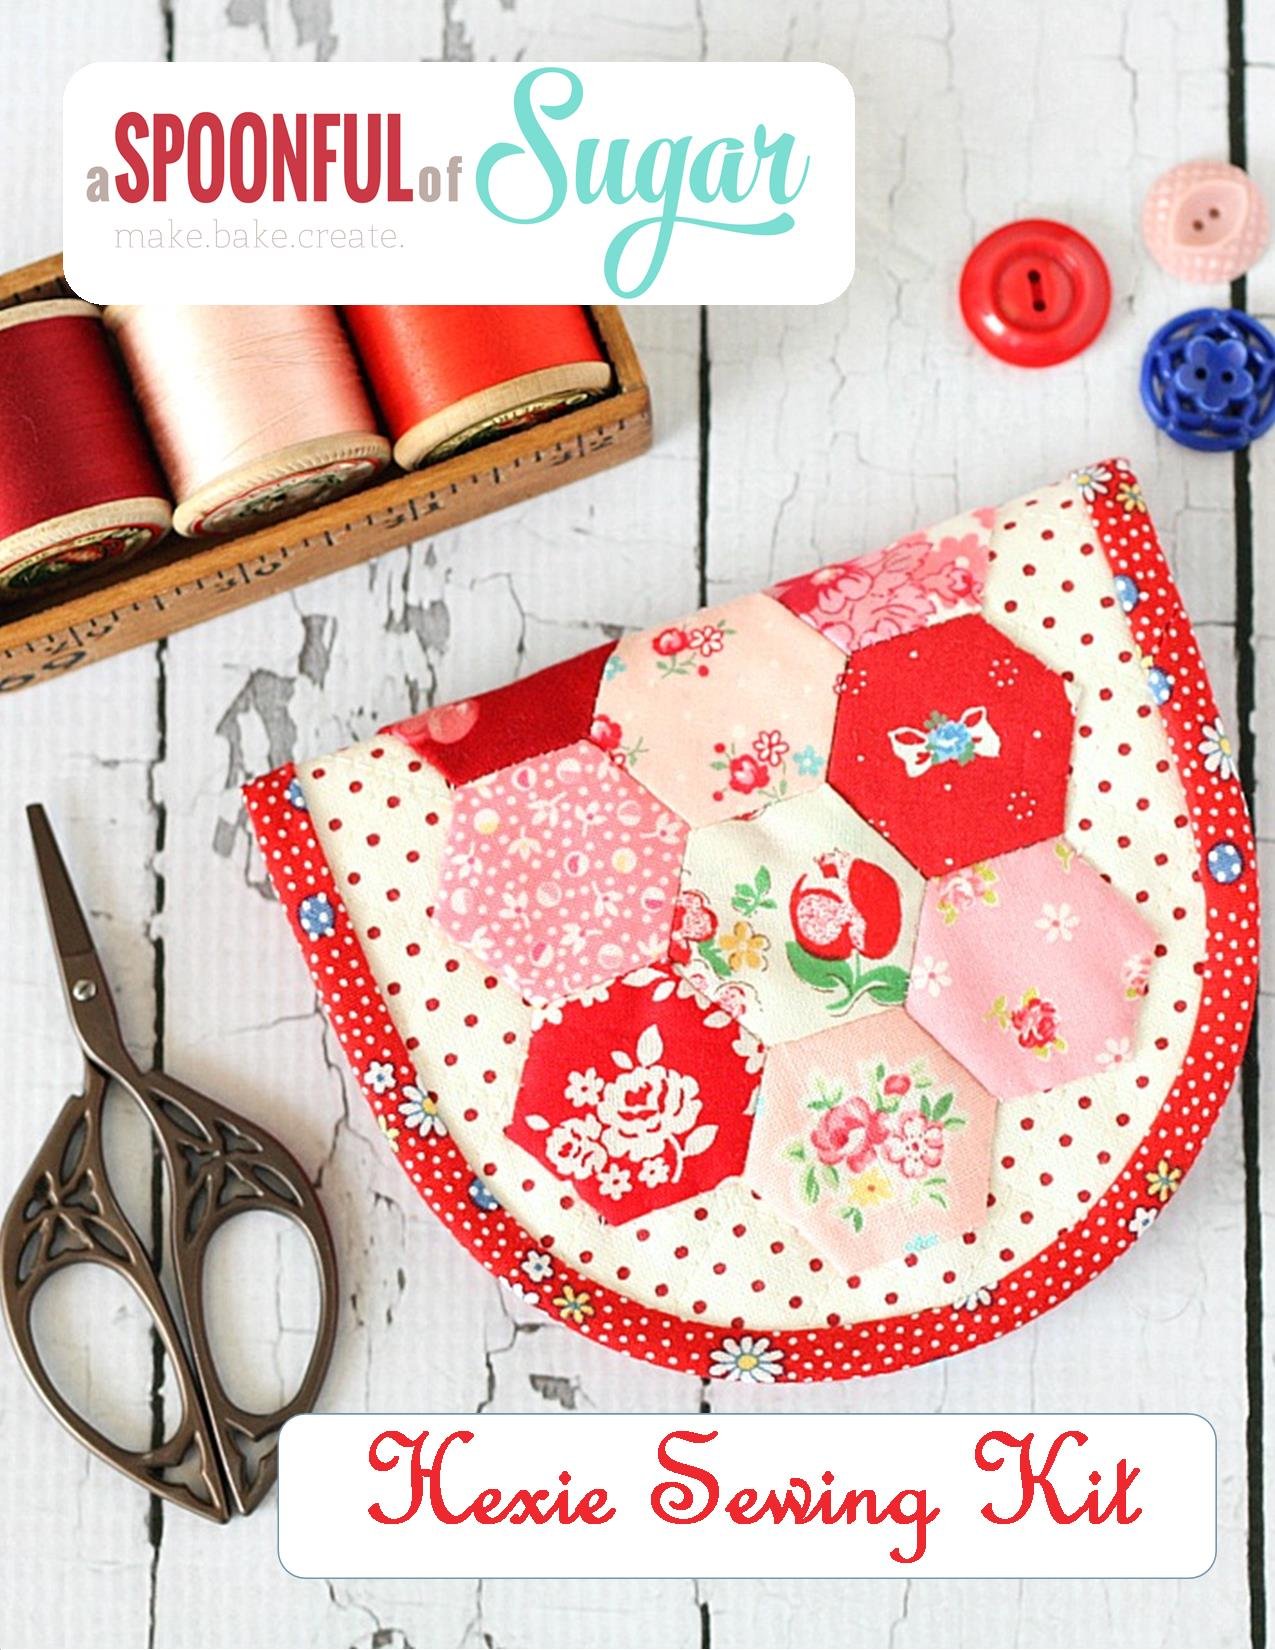 Hexie Sewing Kit PDF Pattern by A Spoonful of Sugar Designs